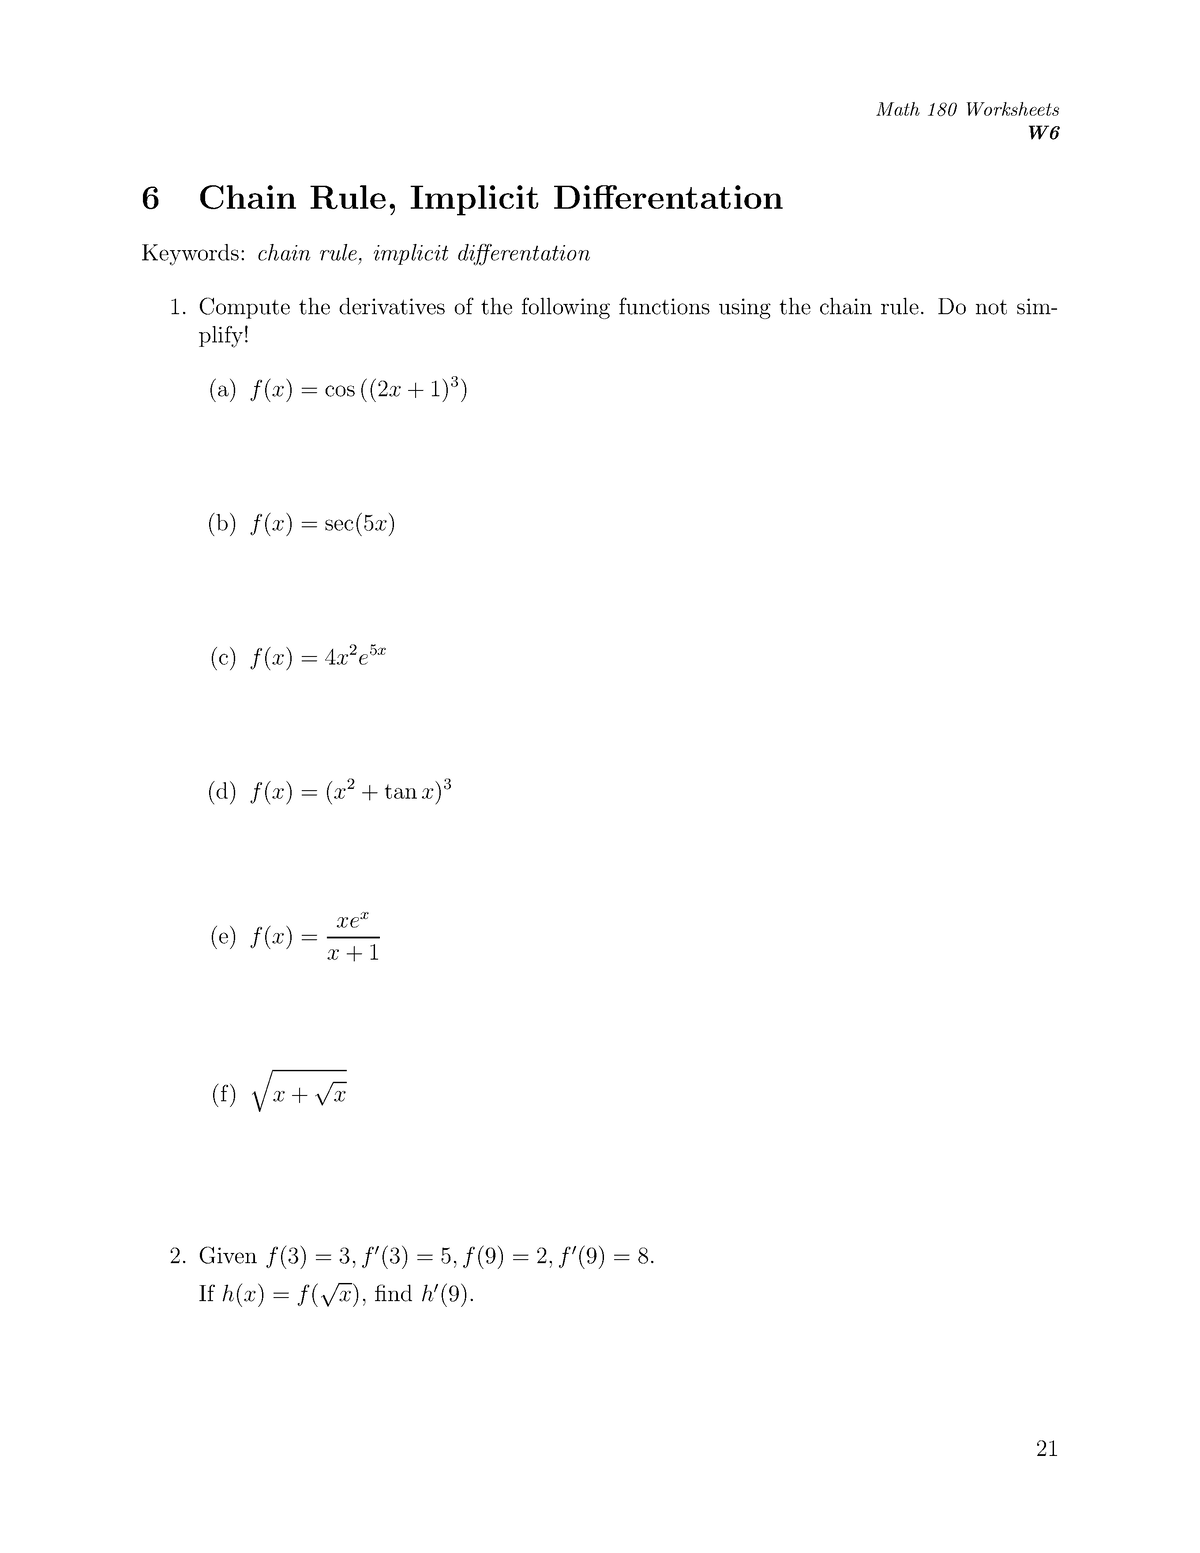 math-180-worksheets-week-7-math-180-worksheets-w-6-chain-rule-implicit-differentation